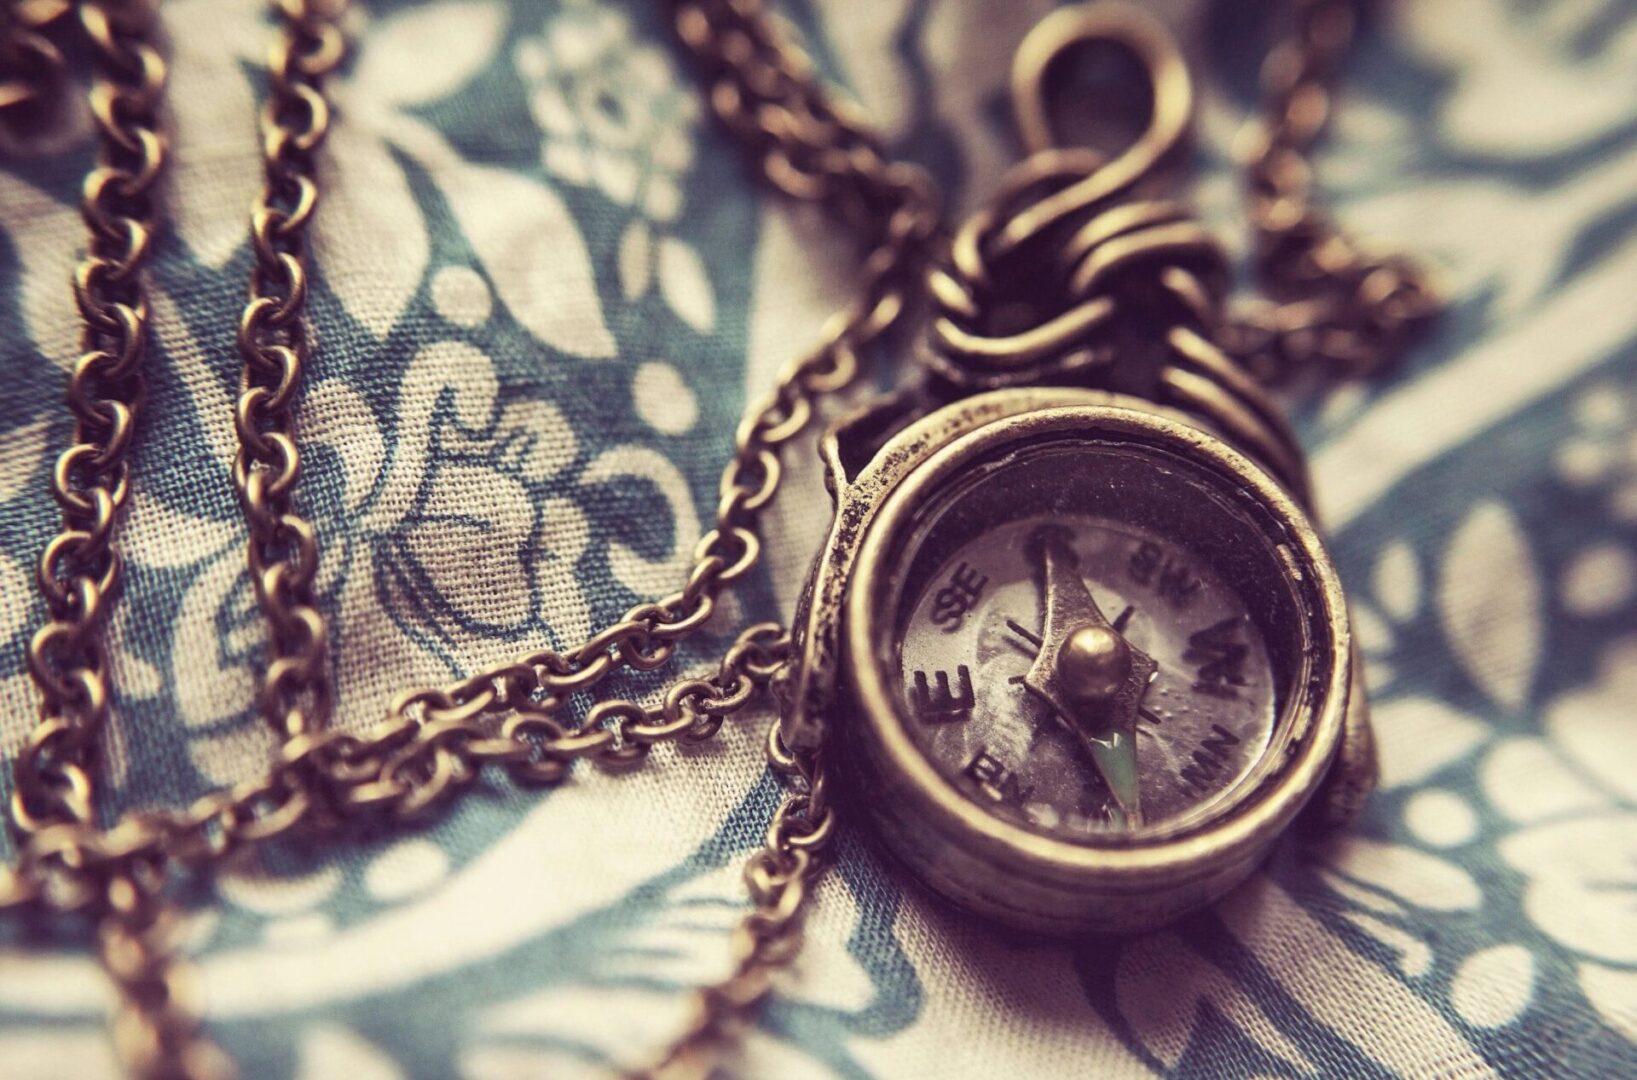 A close up of a compass on a chain